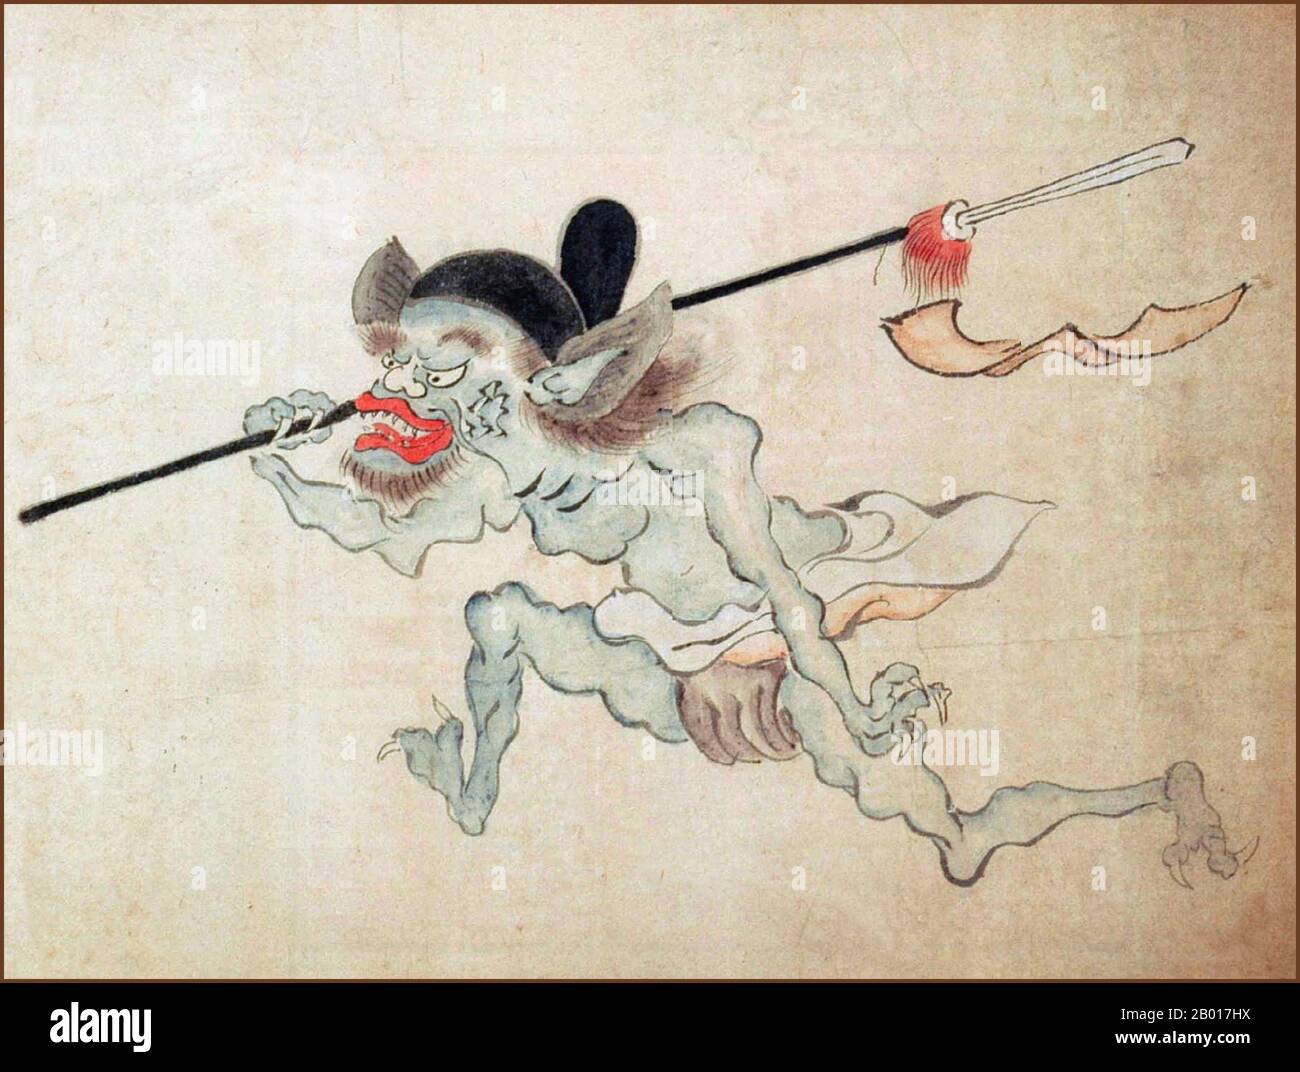 Japan: 'Hyakki Yako (Night Parade of One Hundred Demons)'. Detail of handscroll painting, 19th century.  Hyakki Yagyo/Hyakki Yako ('Night Parade of One Hundred Demons') is a Japanese folk belief. The belief holds that every year yokai, Japanese supernatural beings, will take to the streets during summer nights. The procession is sometimes orderly, while at other times it is a riot. Anyone who comes across the procession will die, unless protected by some Buddhist sutra. It is a popular theme in Japanese visual art. Stock Photo